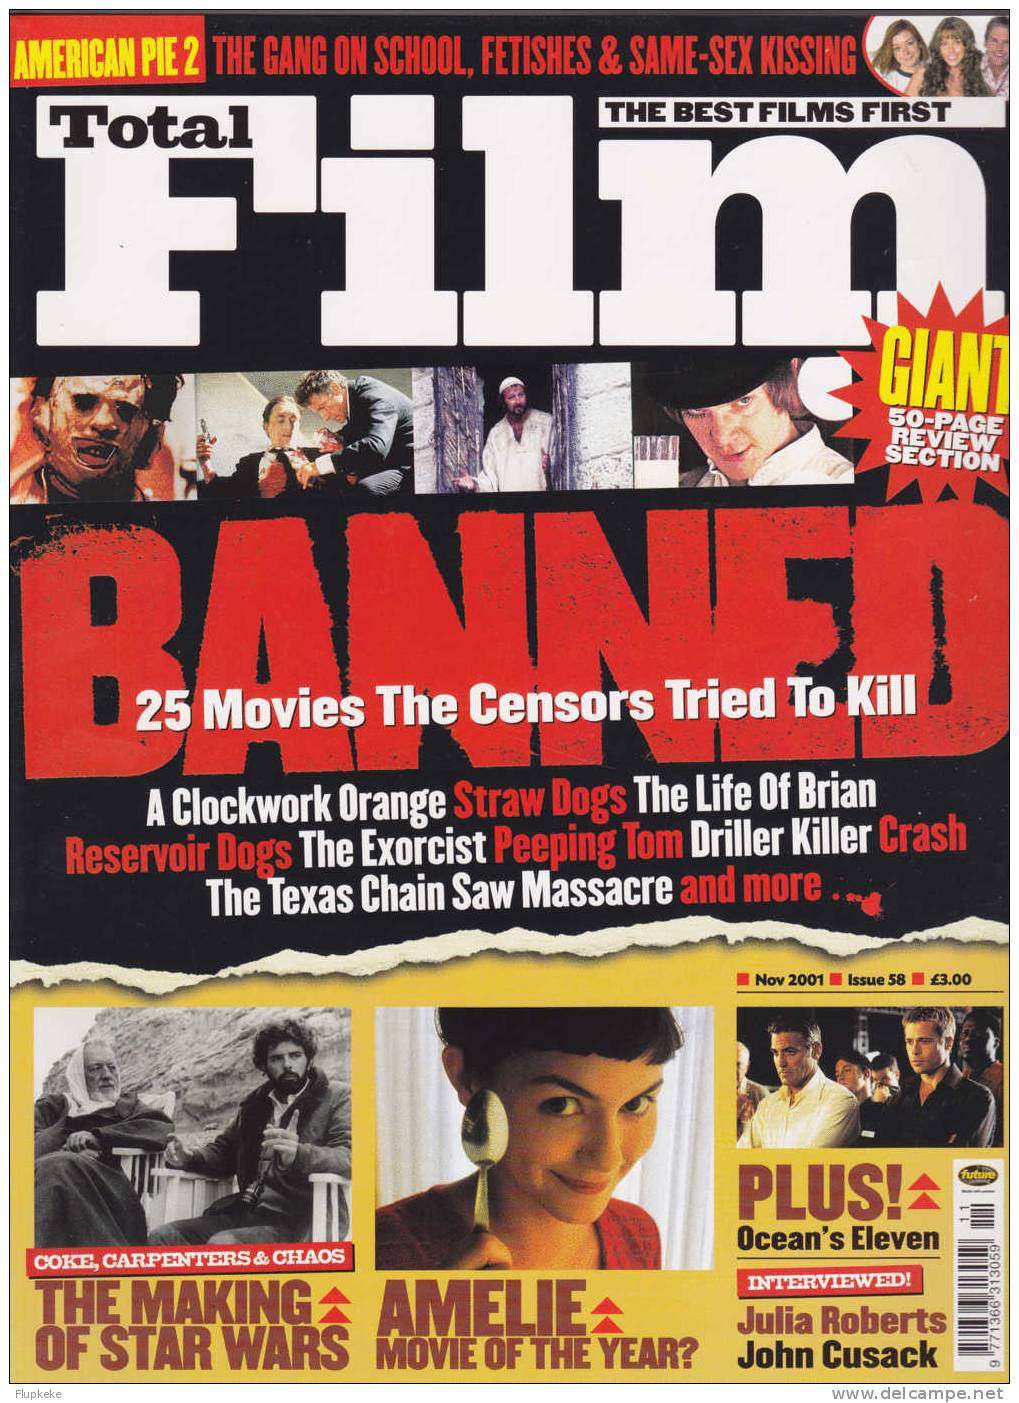 Total Film 58 November 2001 The Making Of Star Wars Banned 25 Movies The Censors Tried To Kill - Entertainment